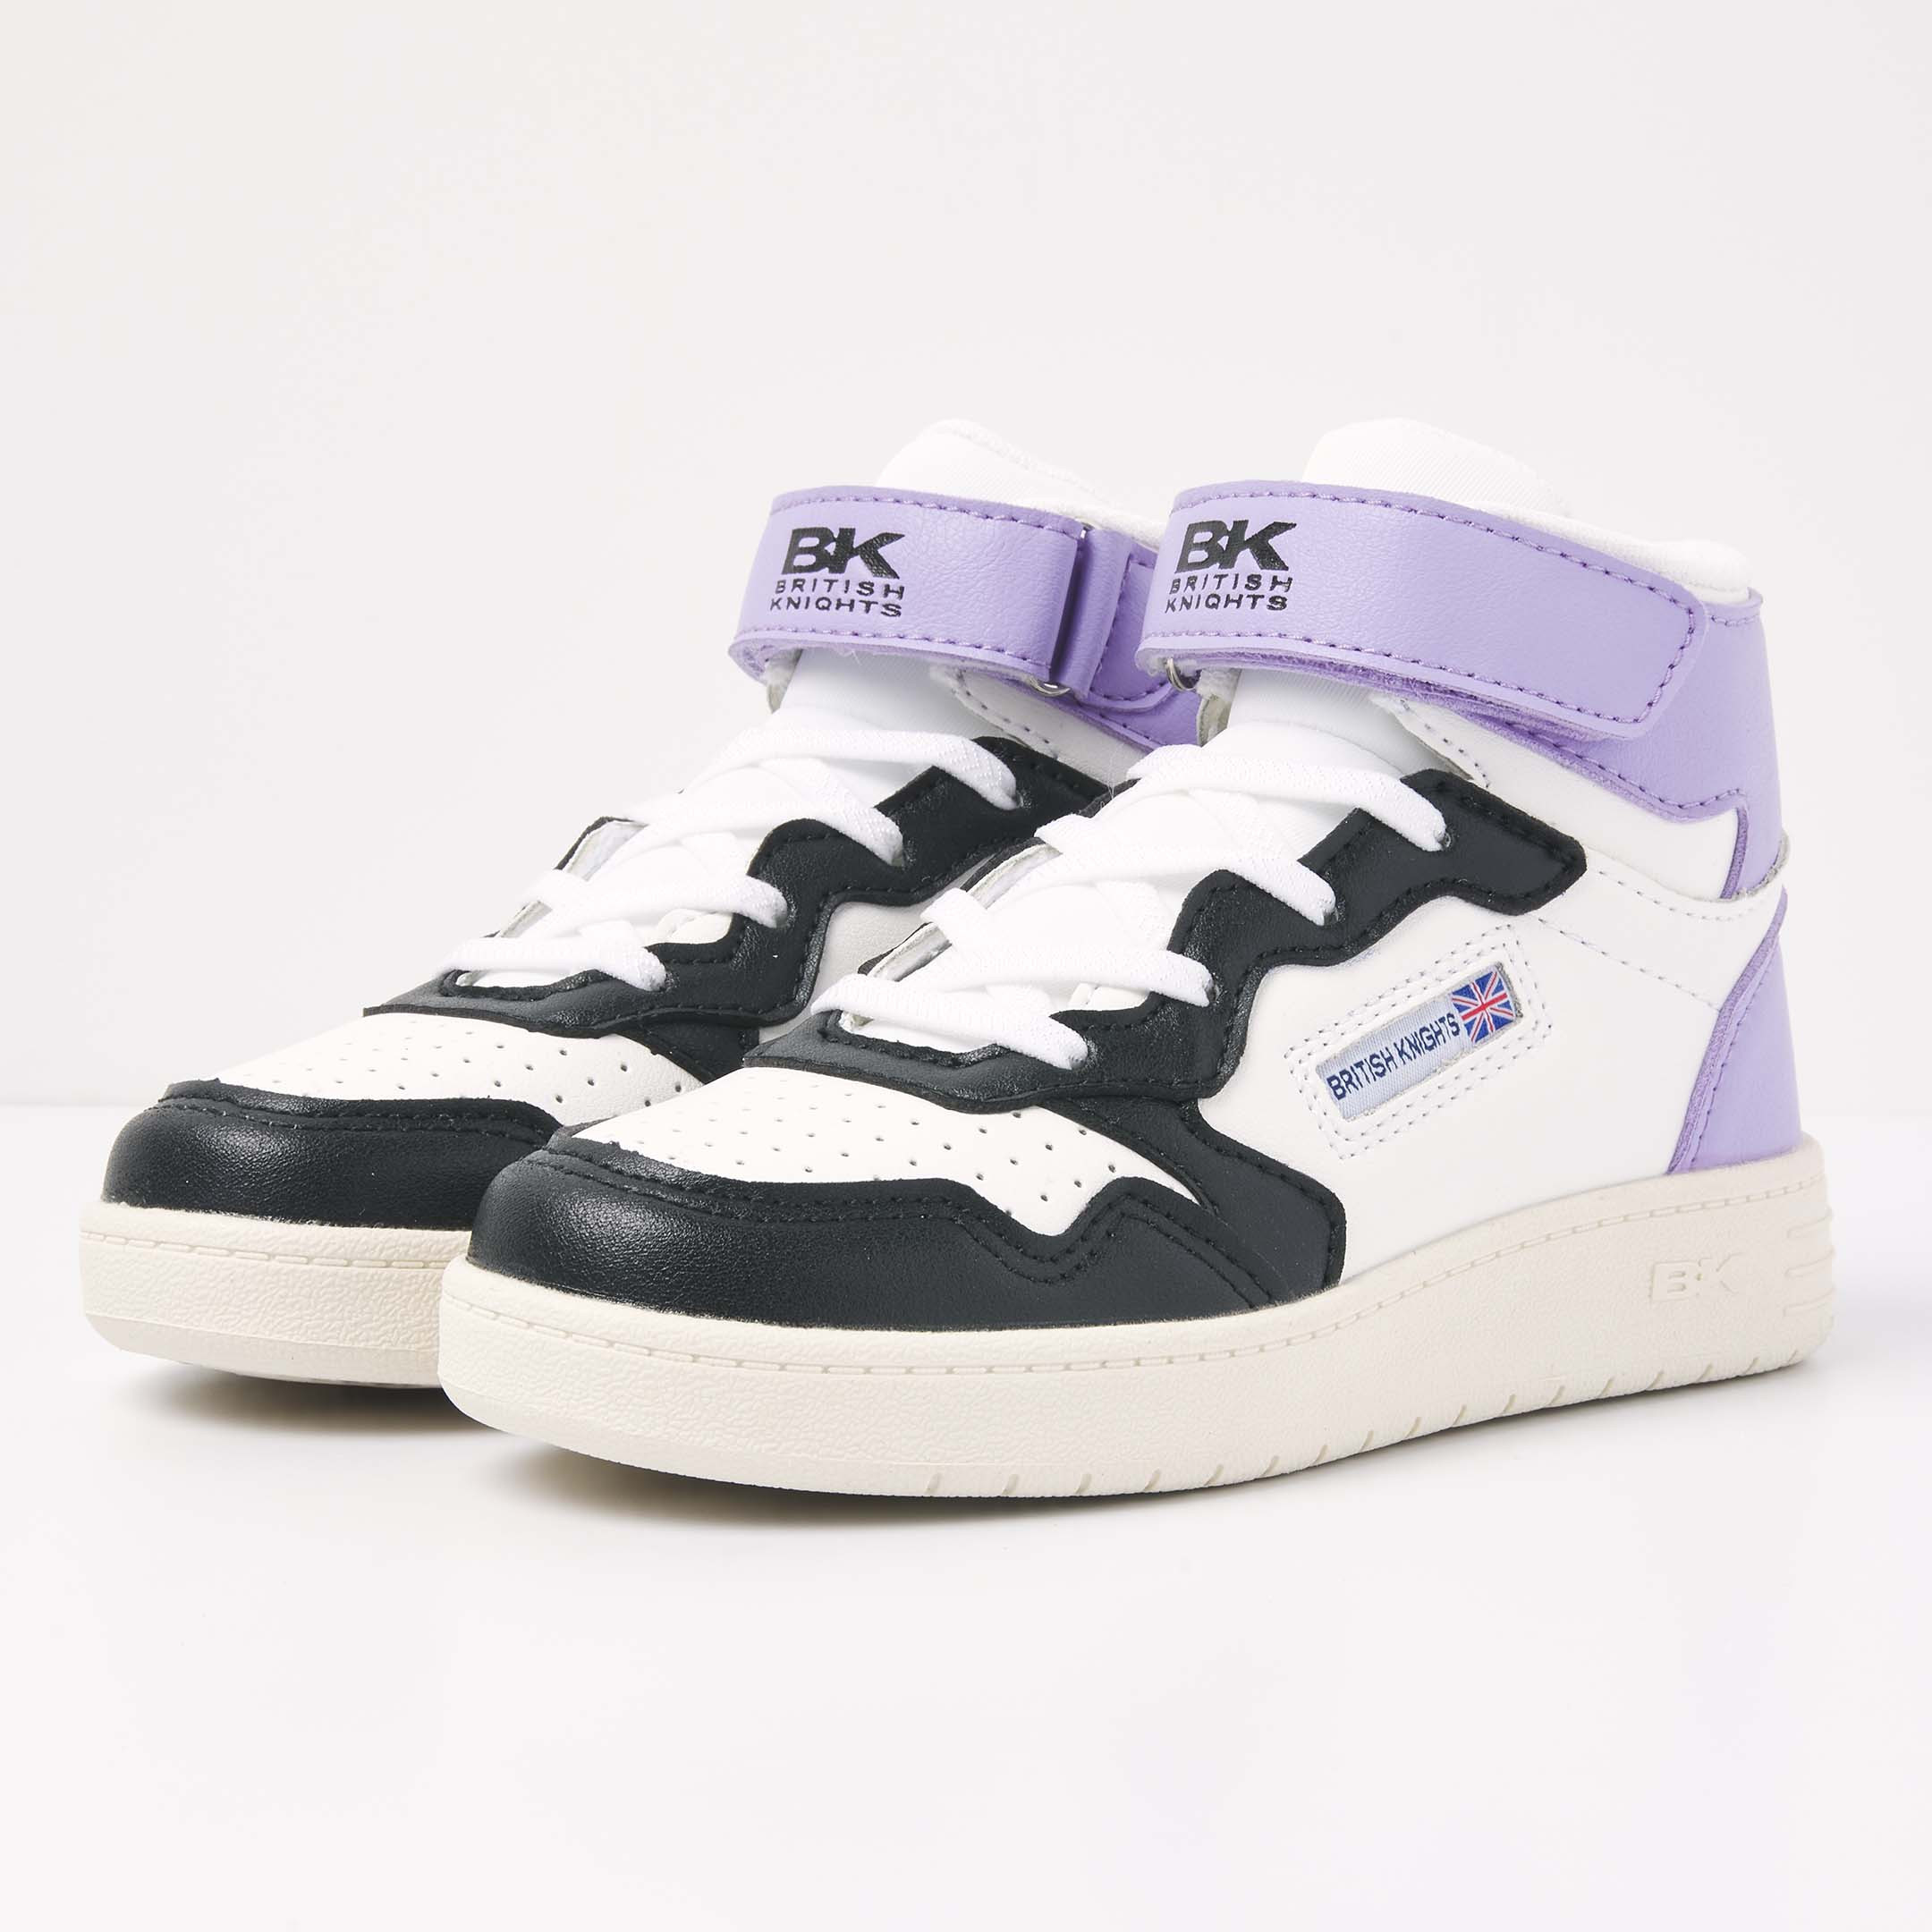 British Knights Sneaker Front view  B51-3620C-02 NOORS MID HIGH-TOP FEMALE